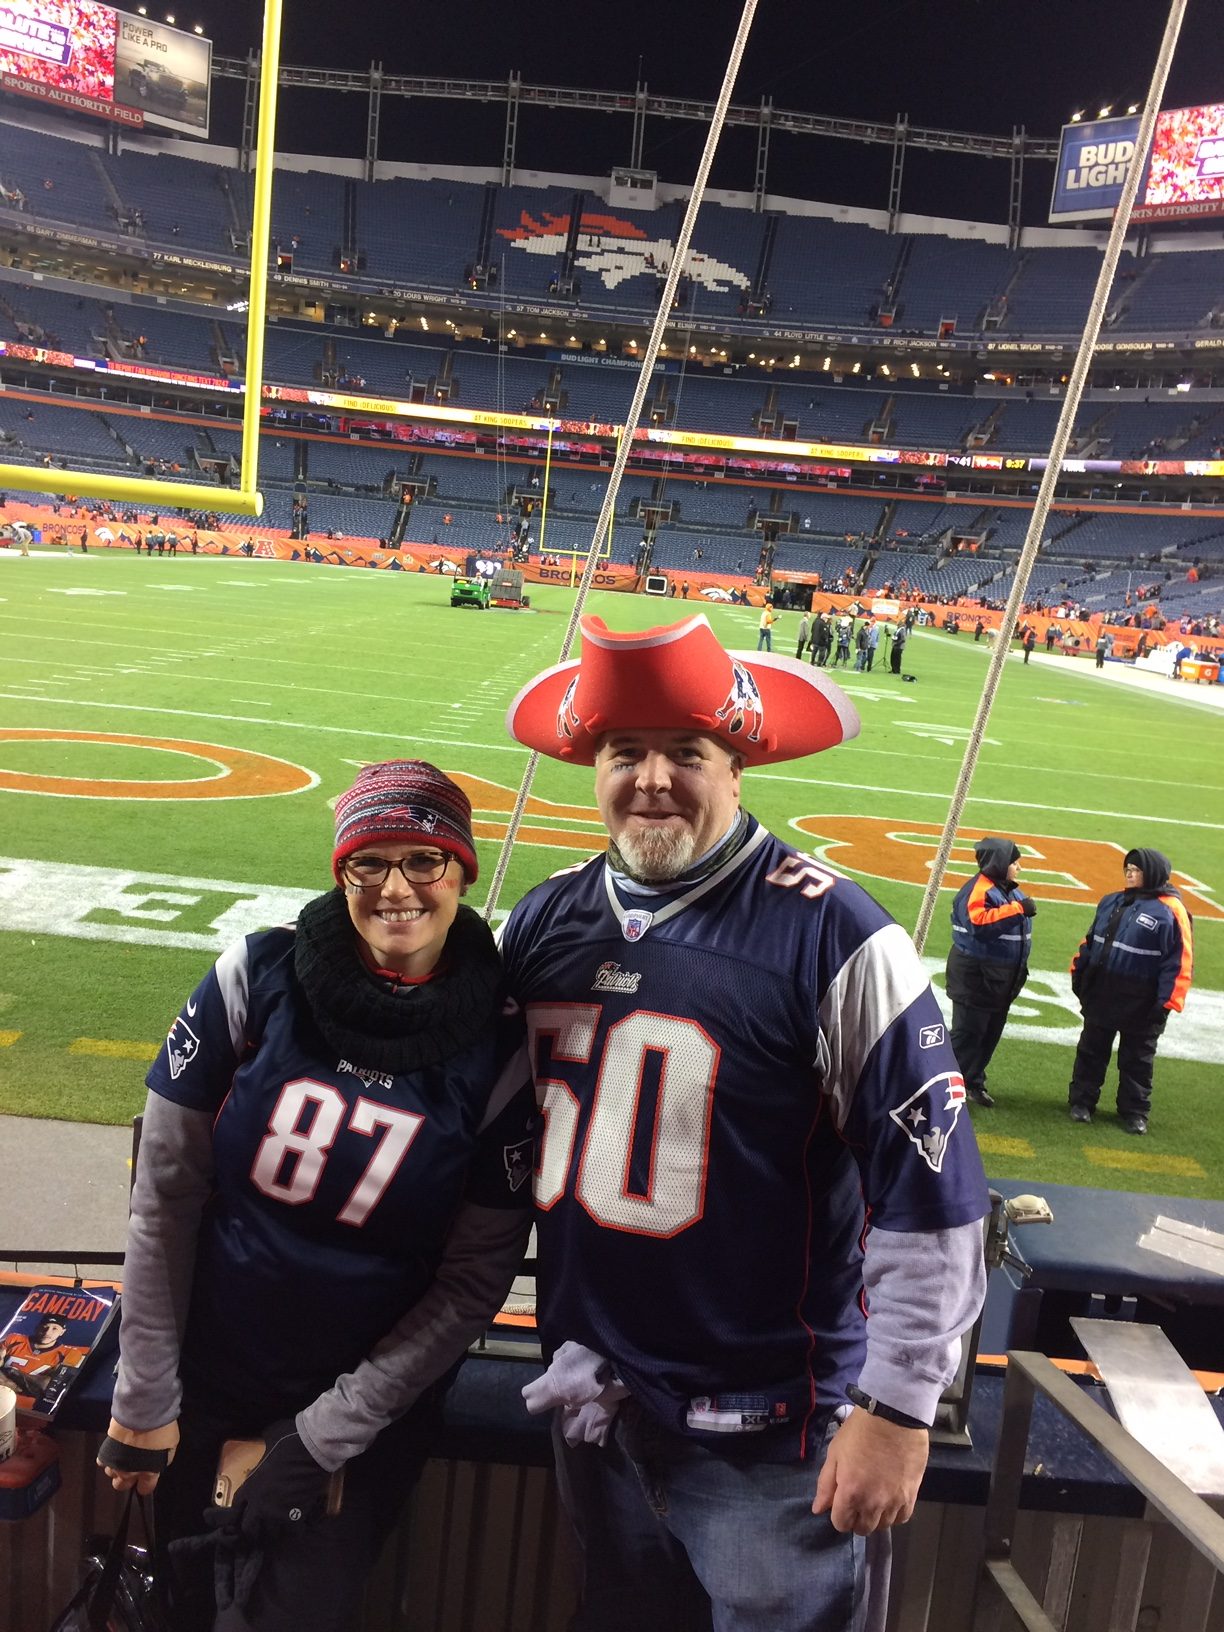 Erica Hendry and husband at Mile High Stadium wearing Patriots jerseys and gear